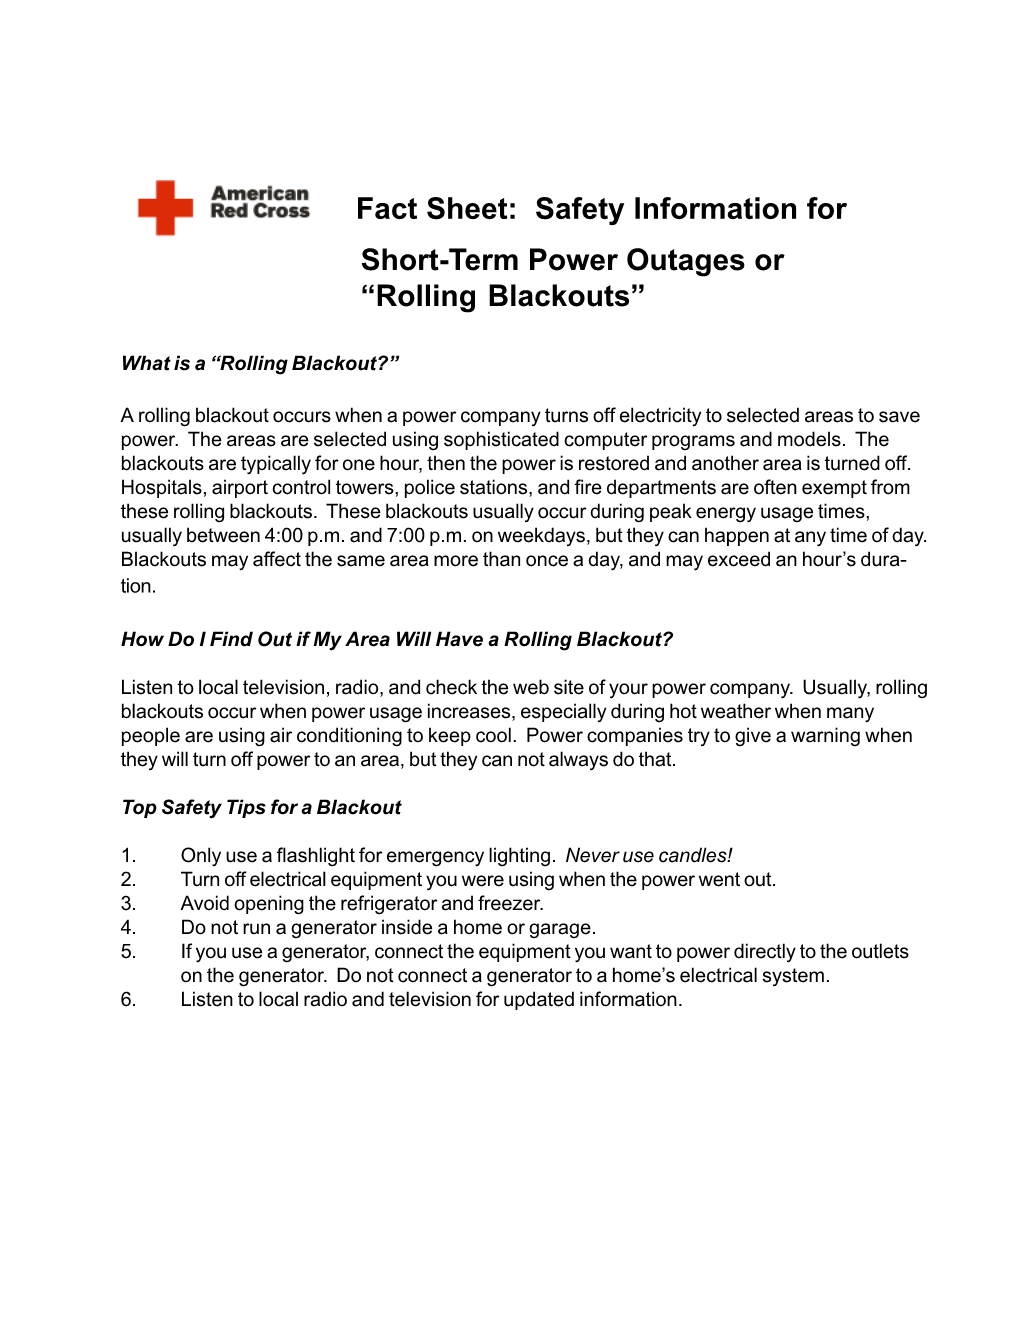 Safety Information for Short-Term Power Outages Or Rolling Blackouts